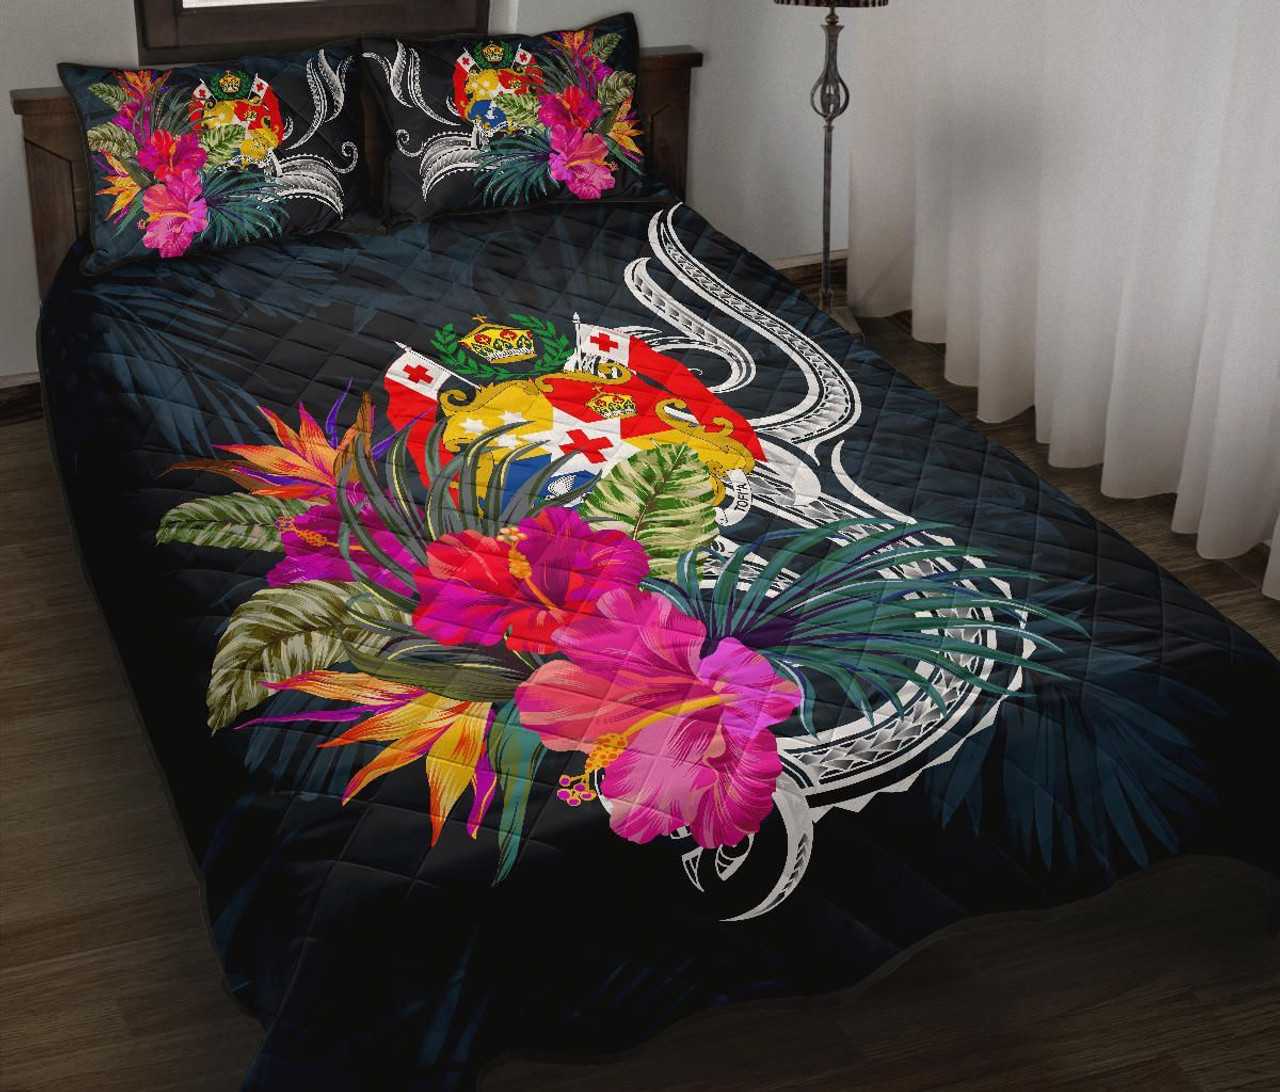 Tonga Polynesian Quilt Bed Set - Tropical Flower 3